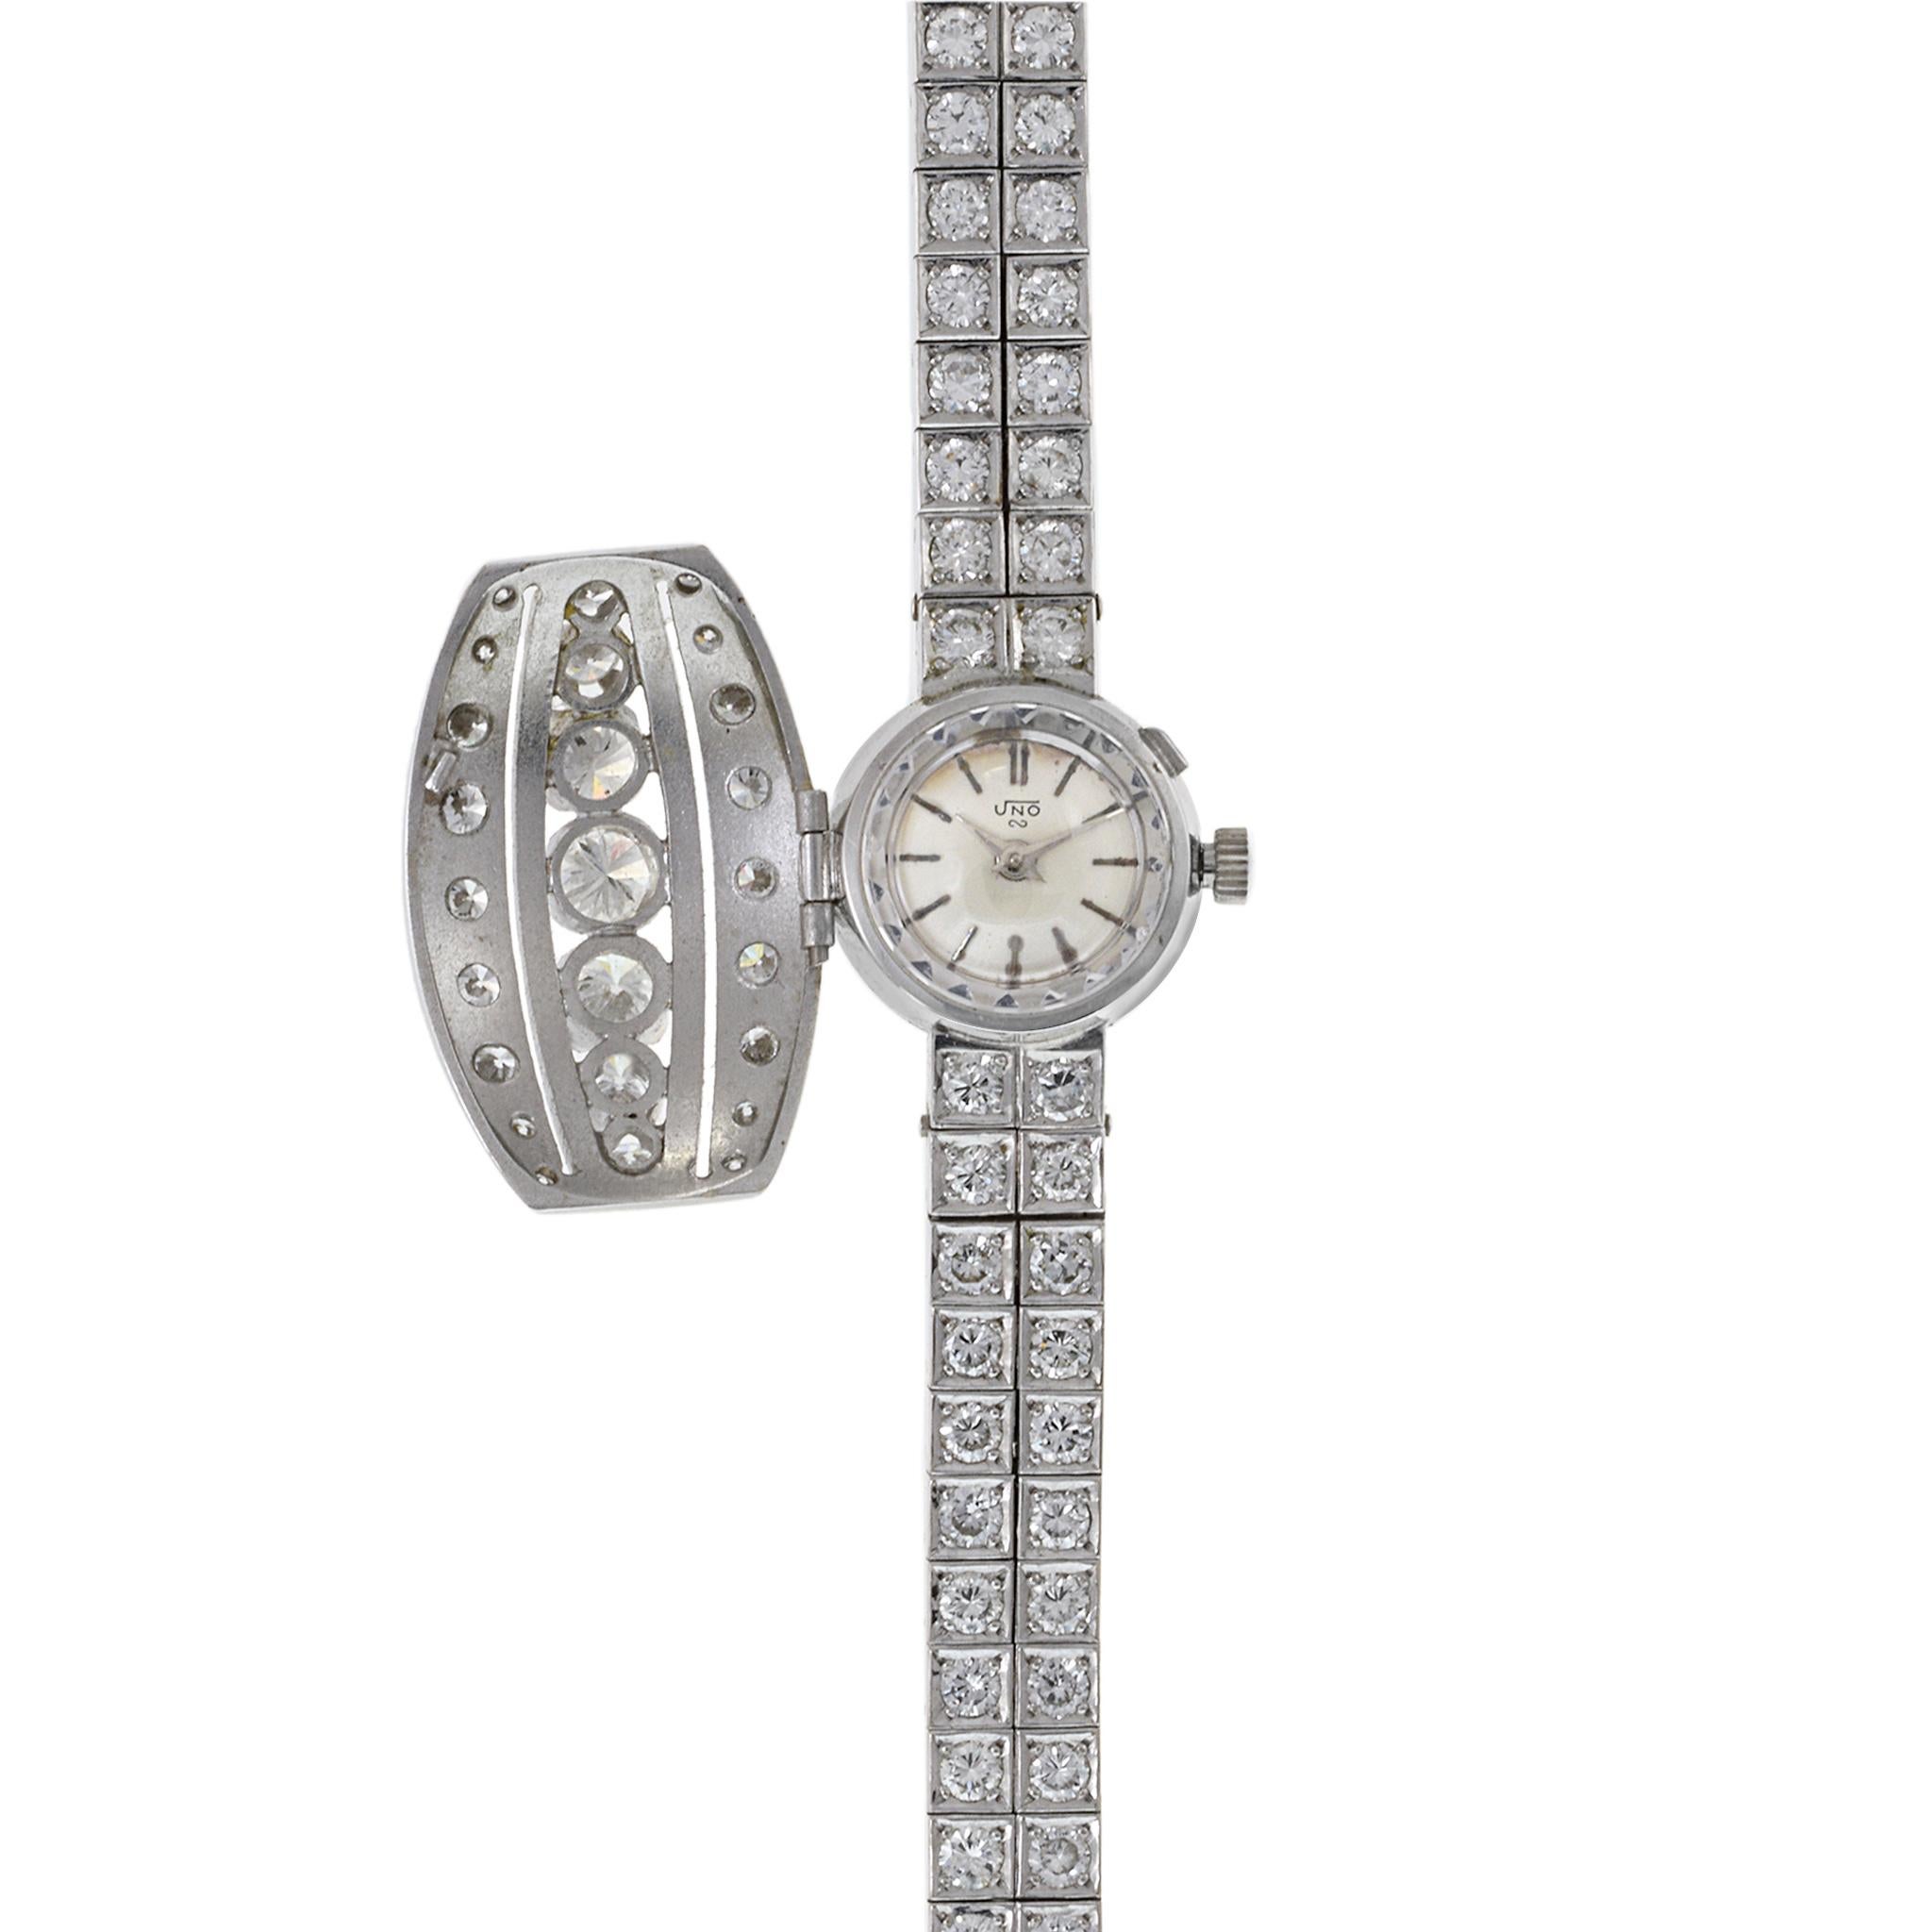 This is a mid century gem a solid 18K white gold Sandoz Uno cocktail watch. This watch is decorated with 8.00CT/F-H color VVS1 and VS diamonds. It features a flip cover over the dial encrusted with seven large diamonds. The actual case of the watch